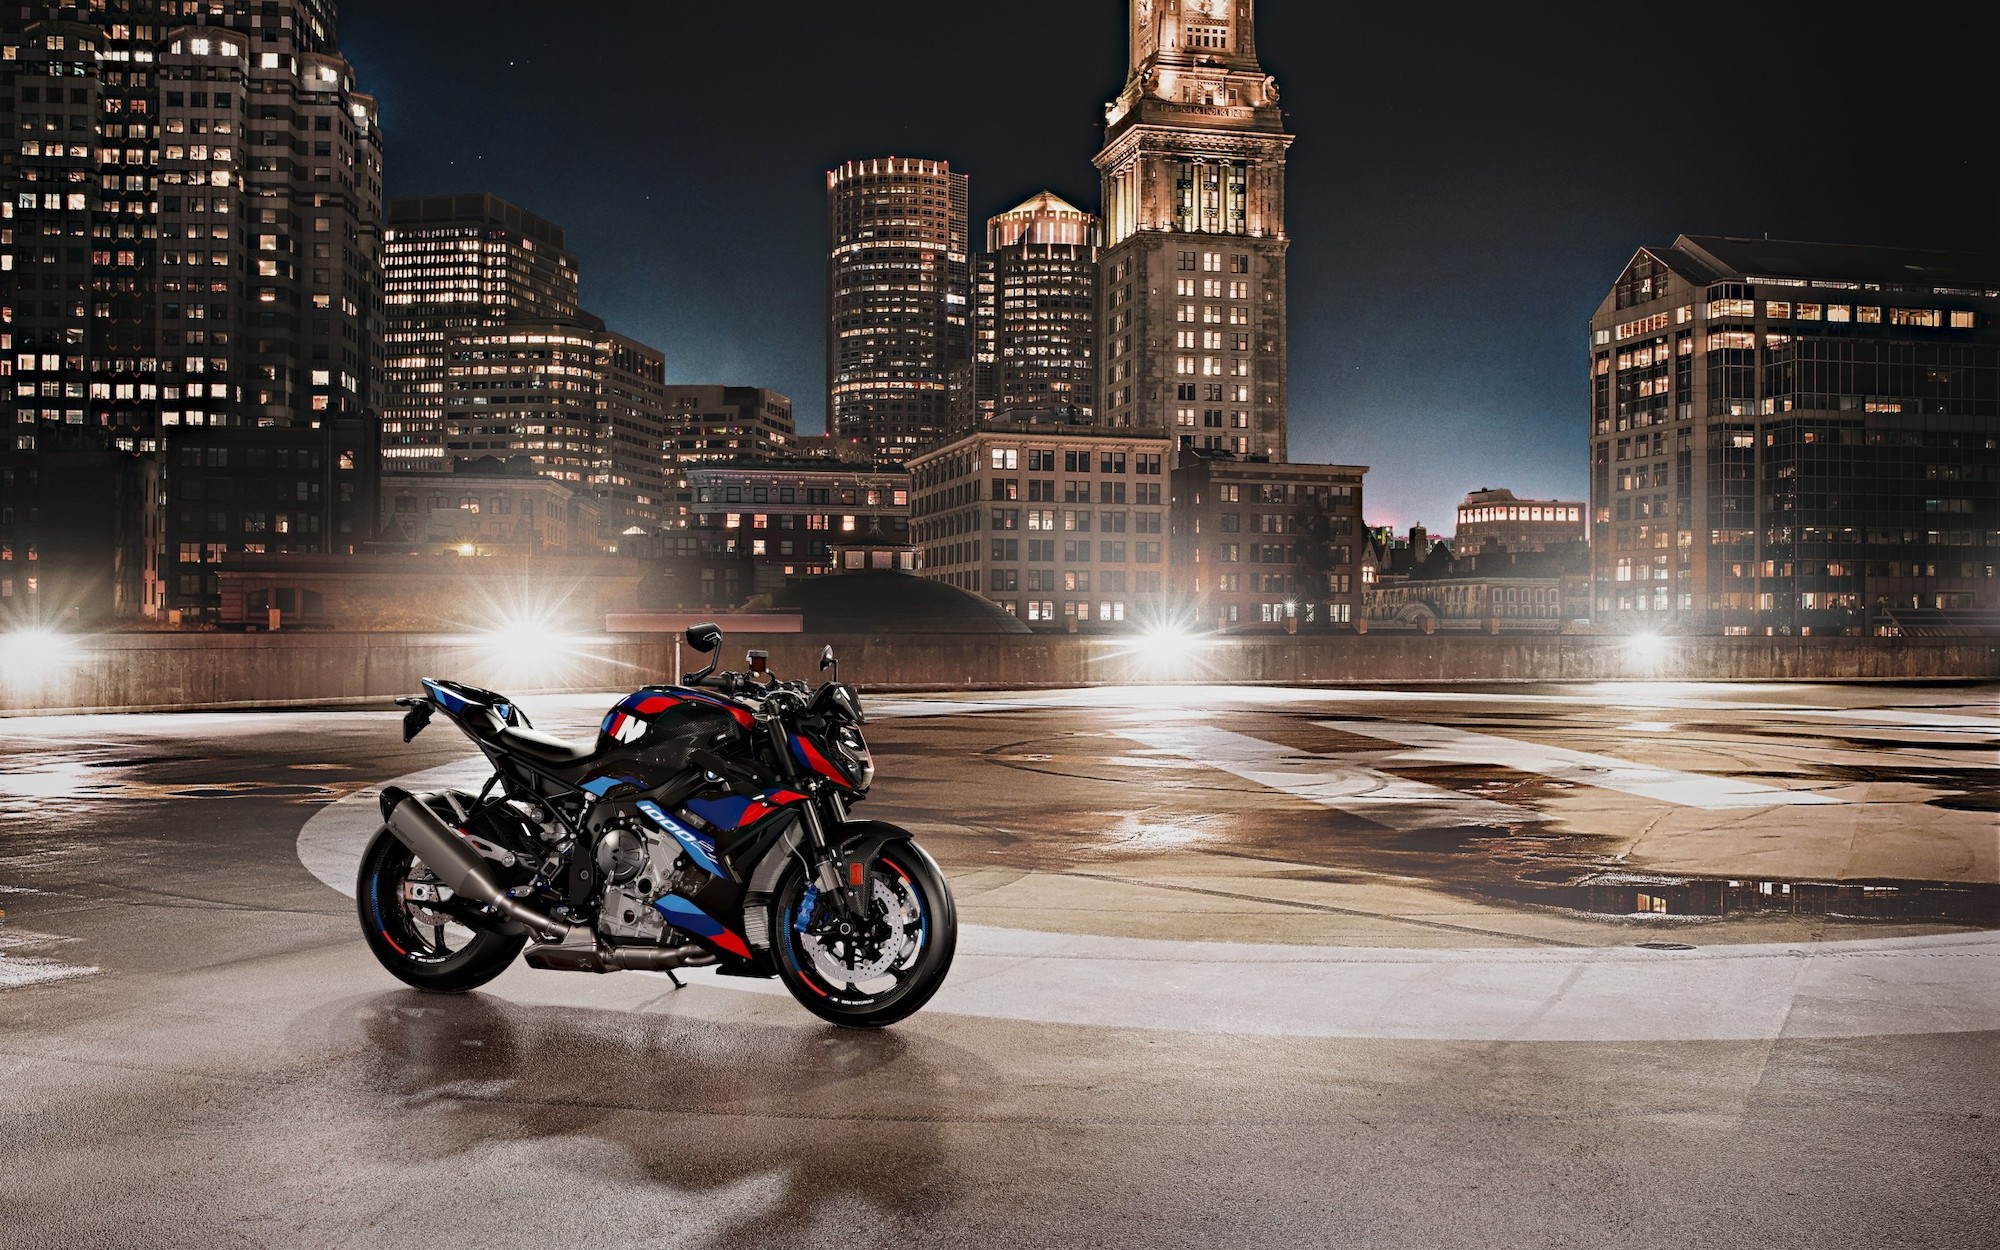 The BMW M 1000 R (MR) Roadster. Media sourced from BMW's press release on Newspress USA.